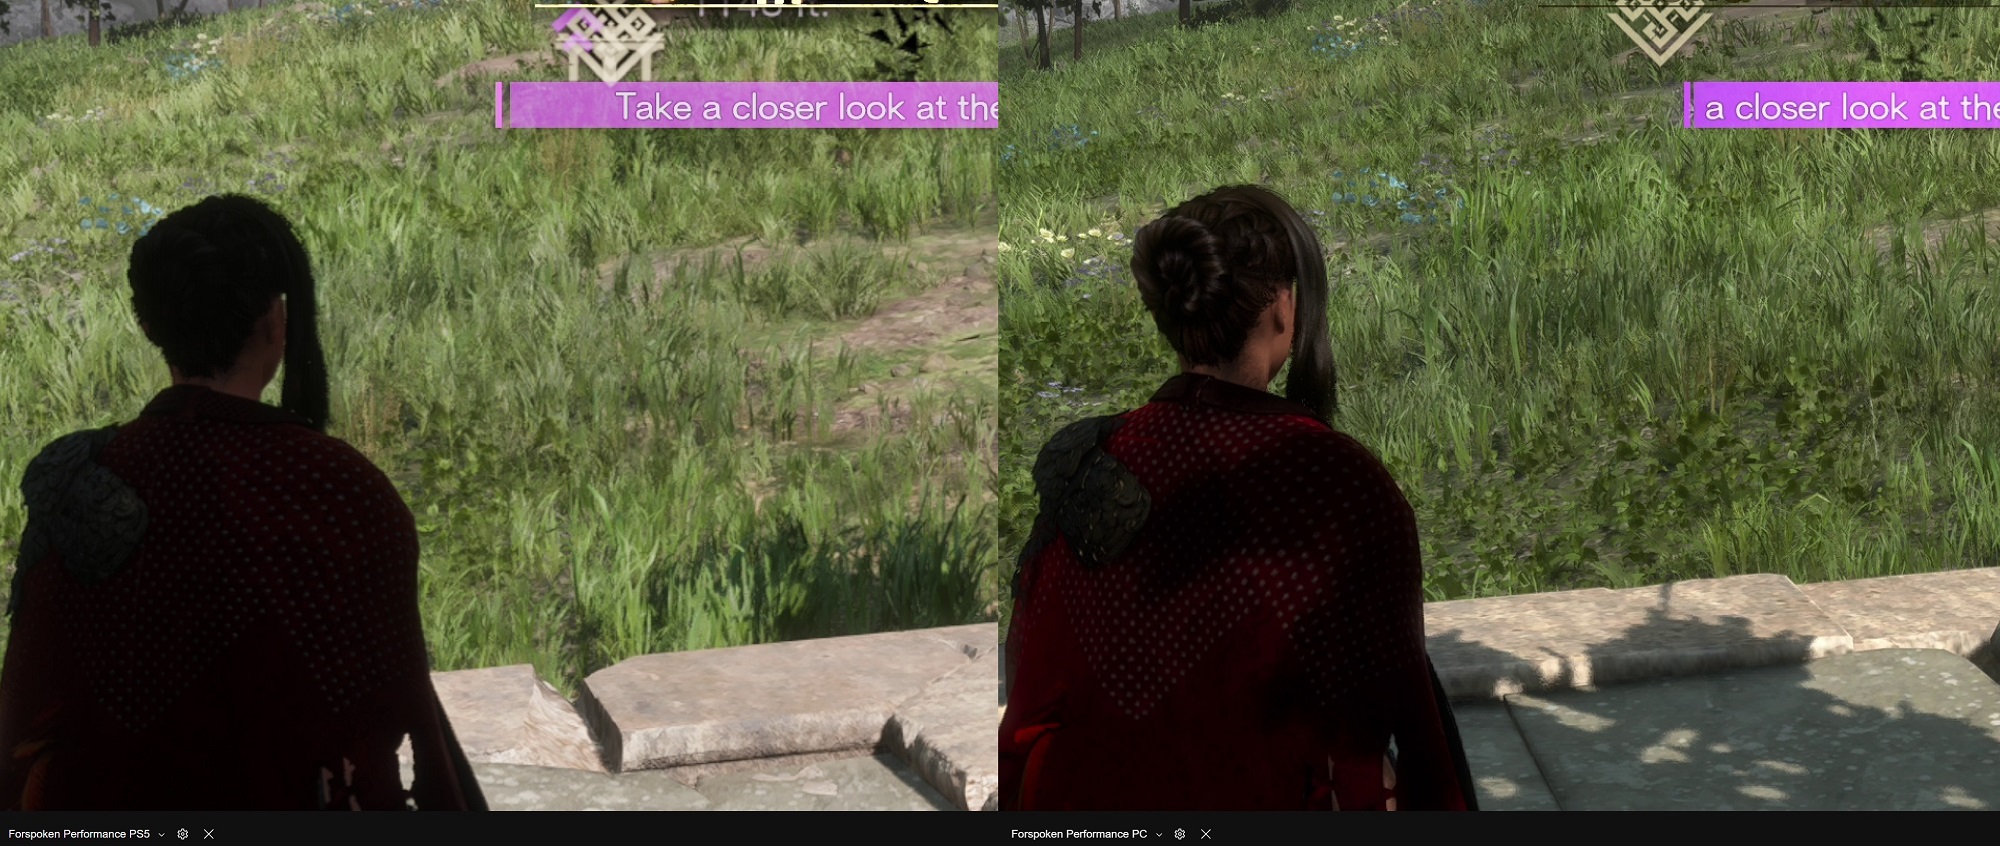 The Last of Us Part 1 Remake PC vs PS5 Graphics Comparison - A  Disappointing PC Port 